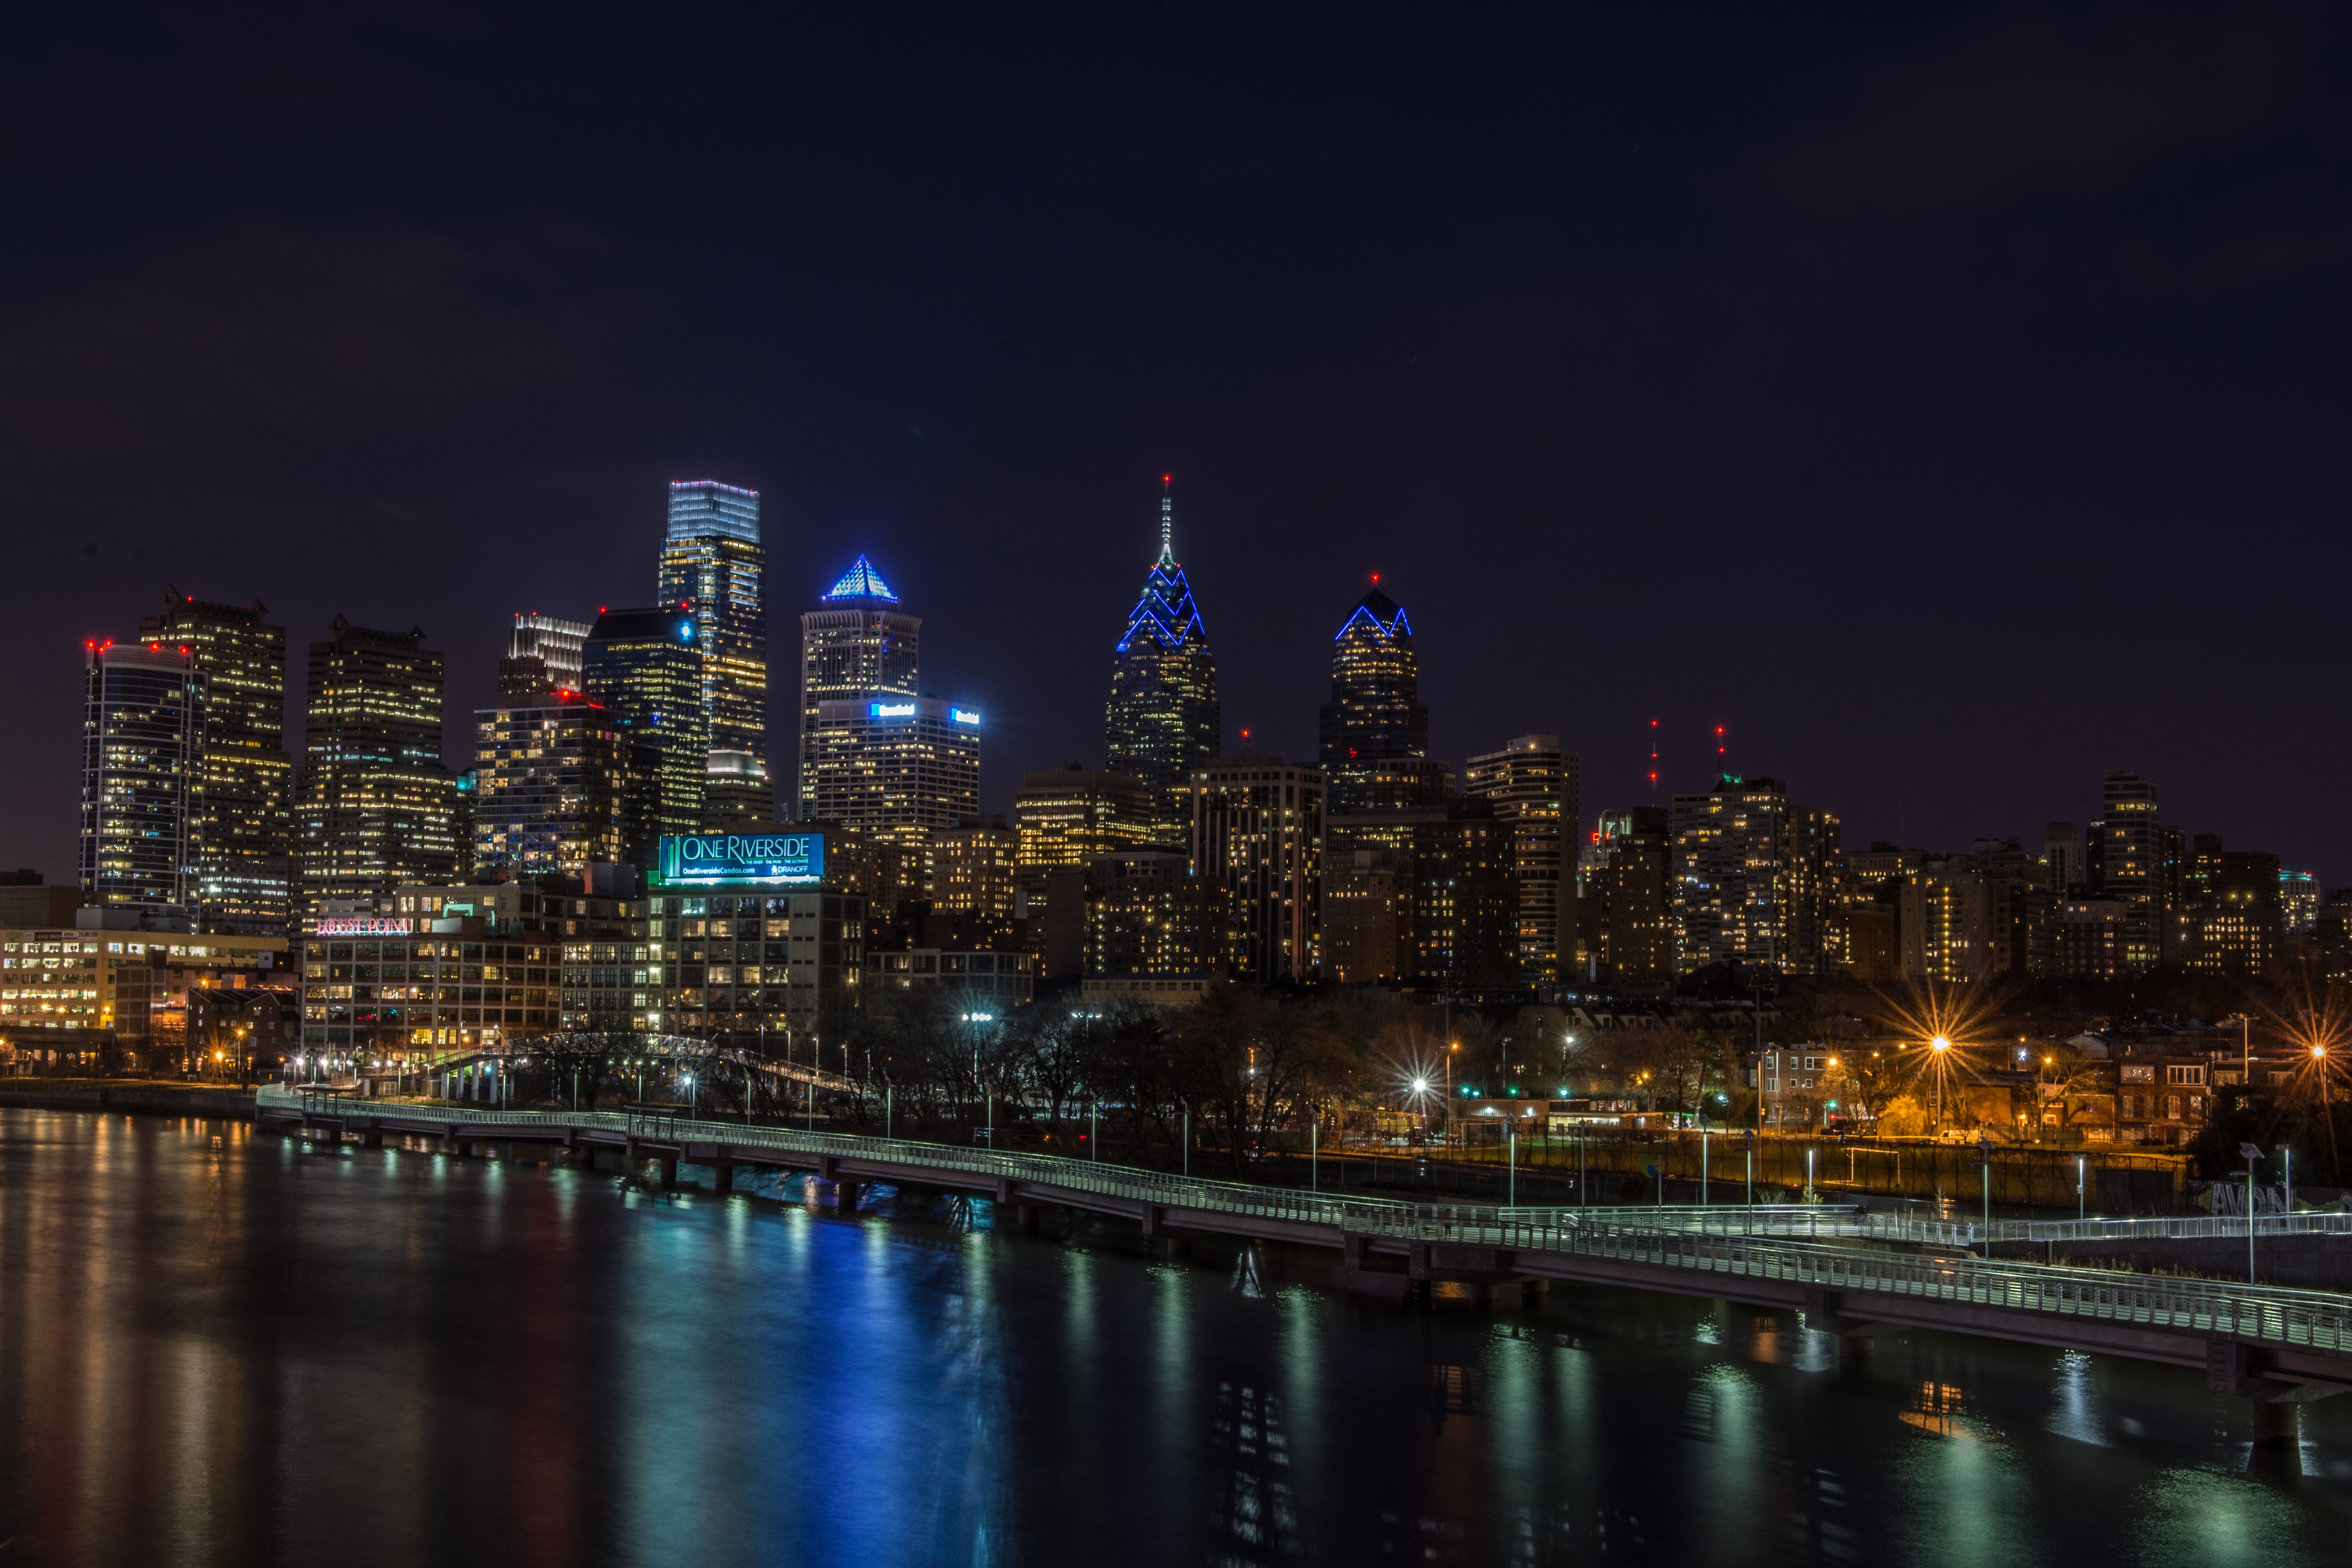 cities, water, building, lights, reflection, night city QHD